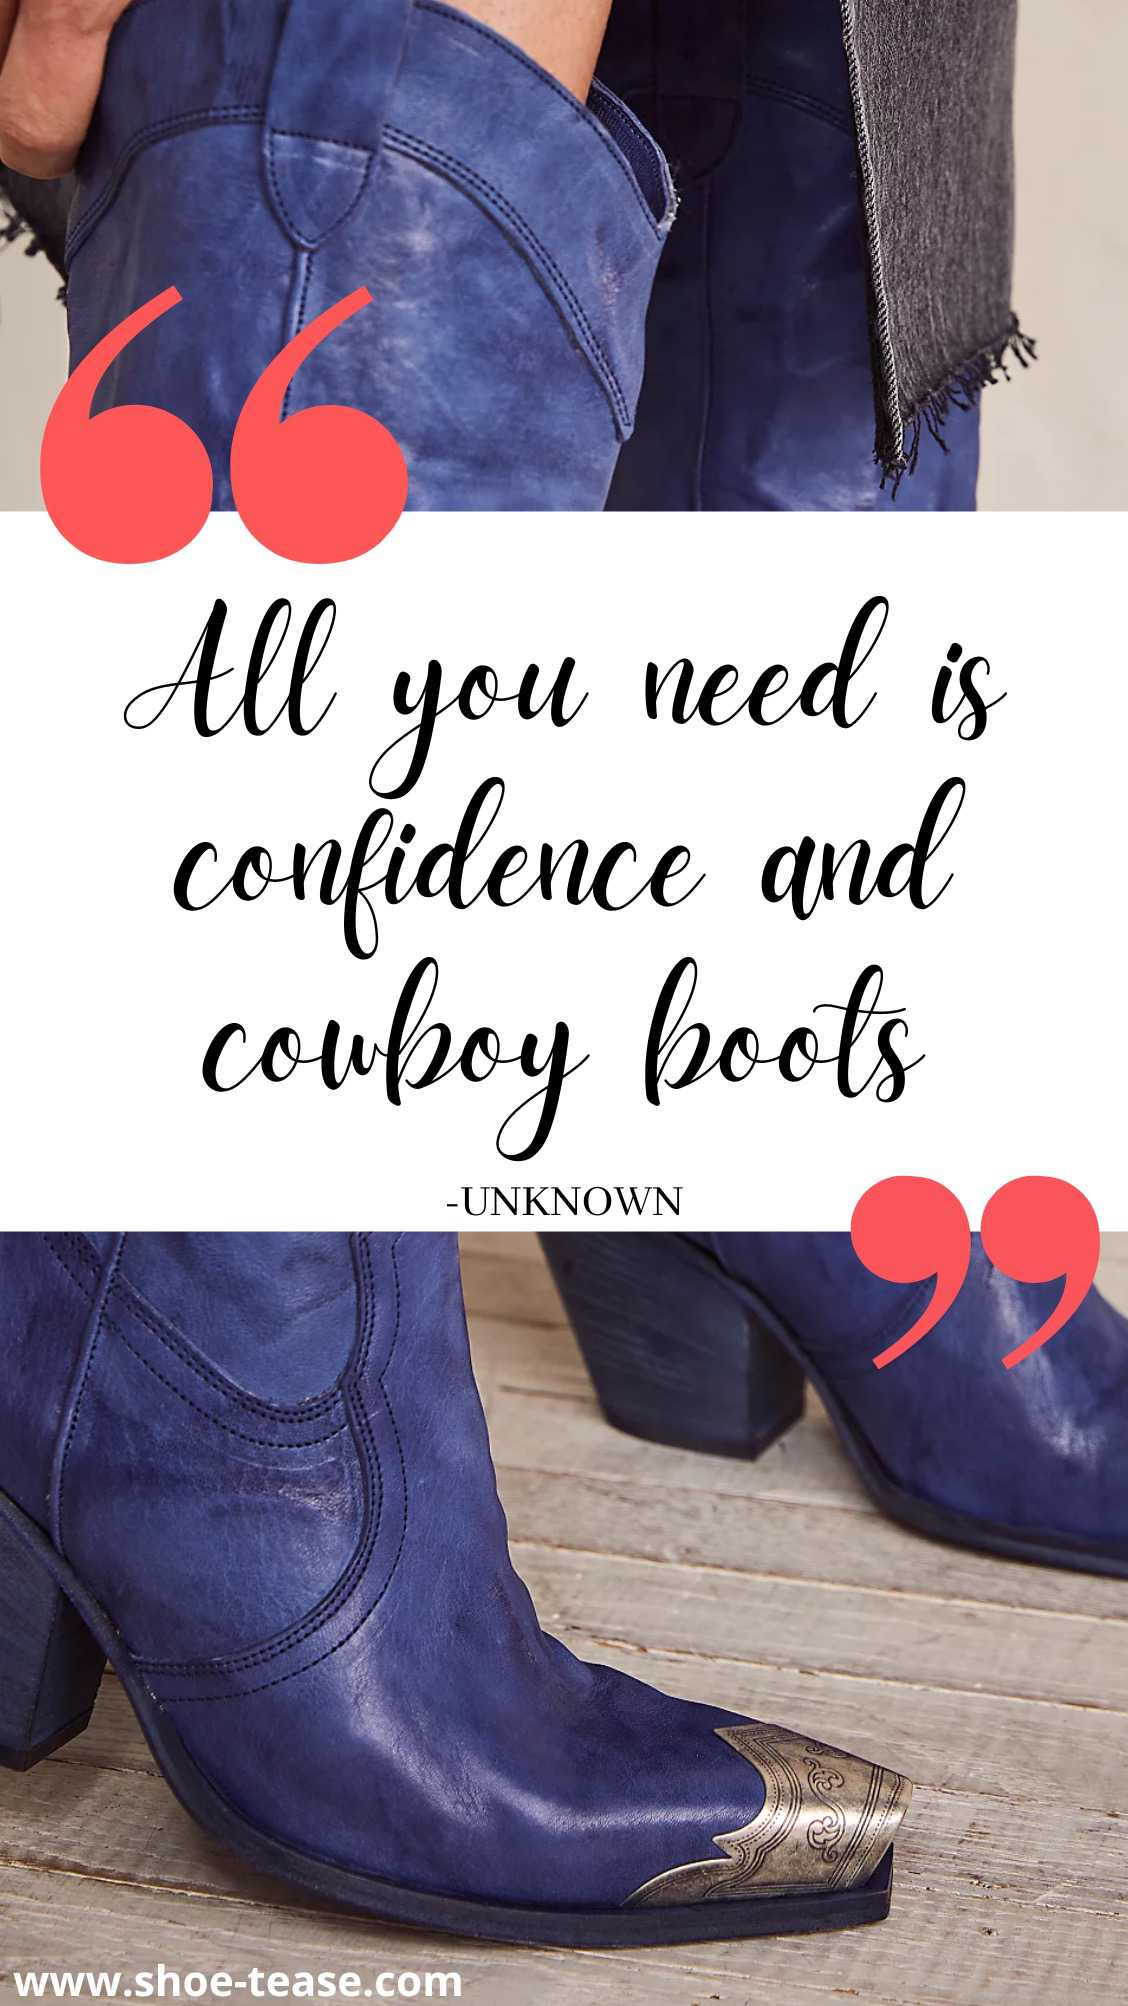 Quote reading All you need is confidence and cowboy boots Unknown over image of woman's legs wearing bright blue cowboy boots.